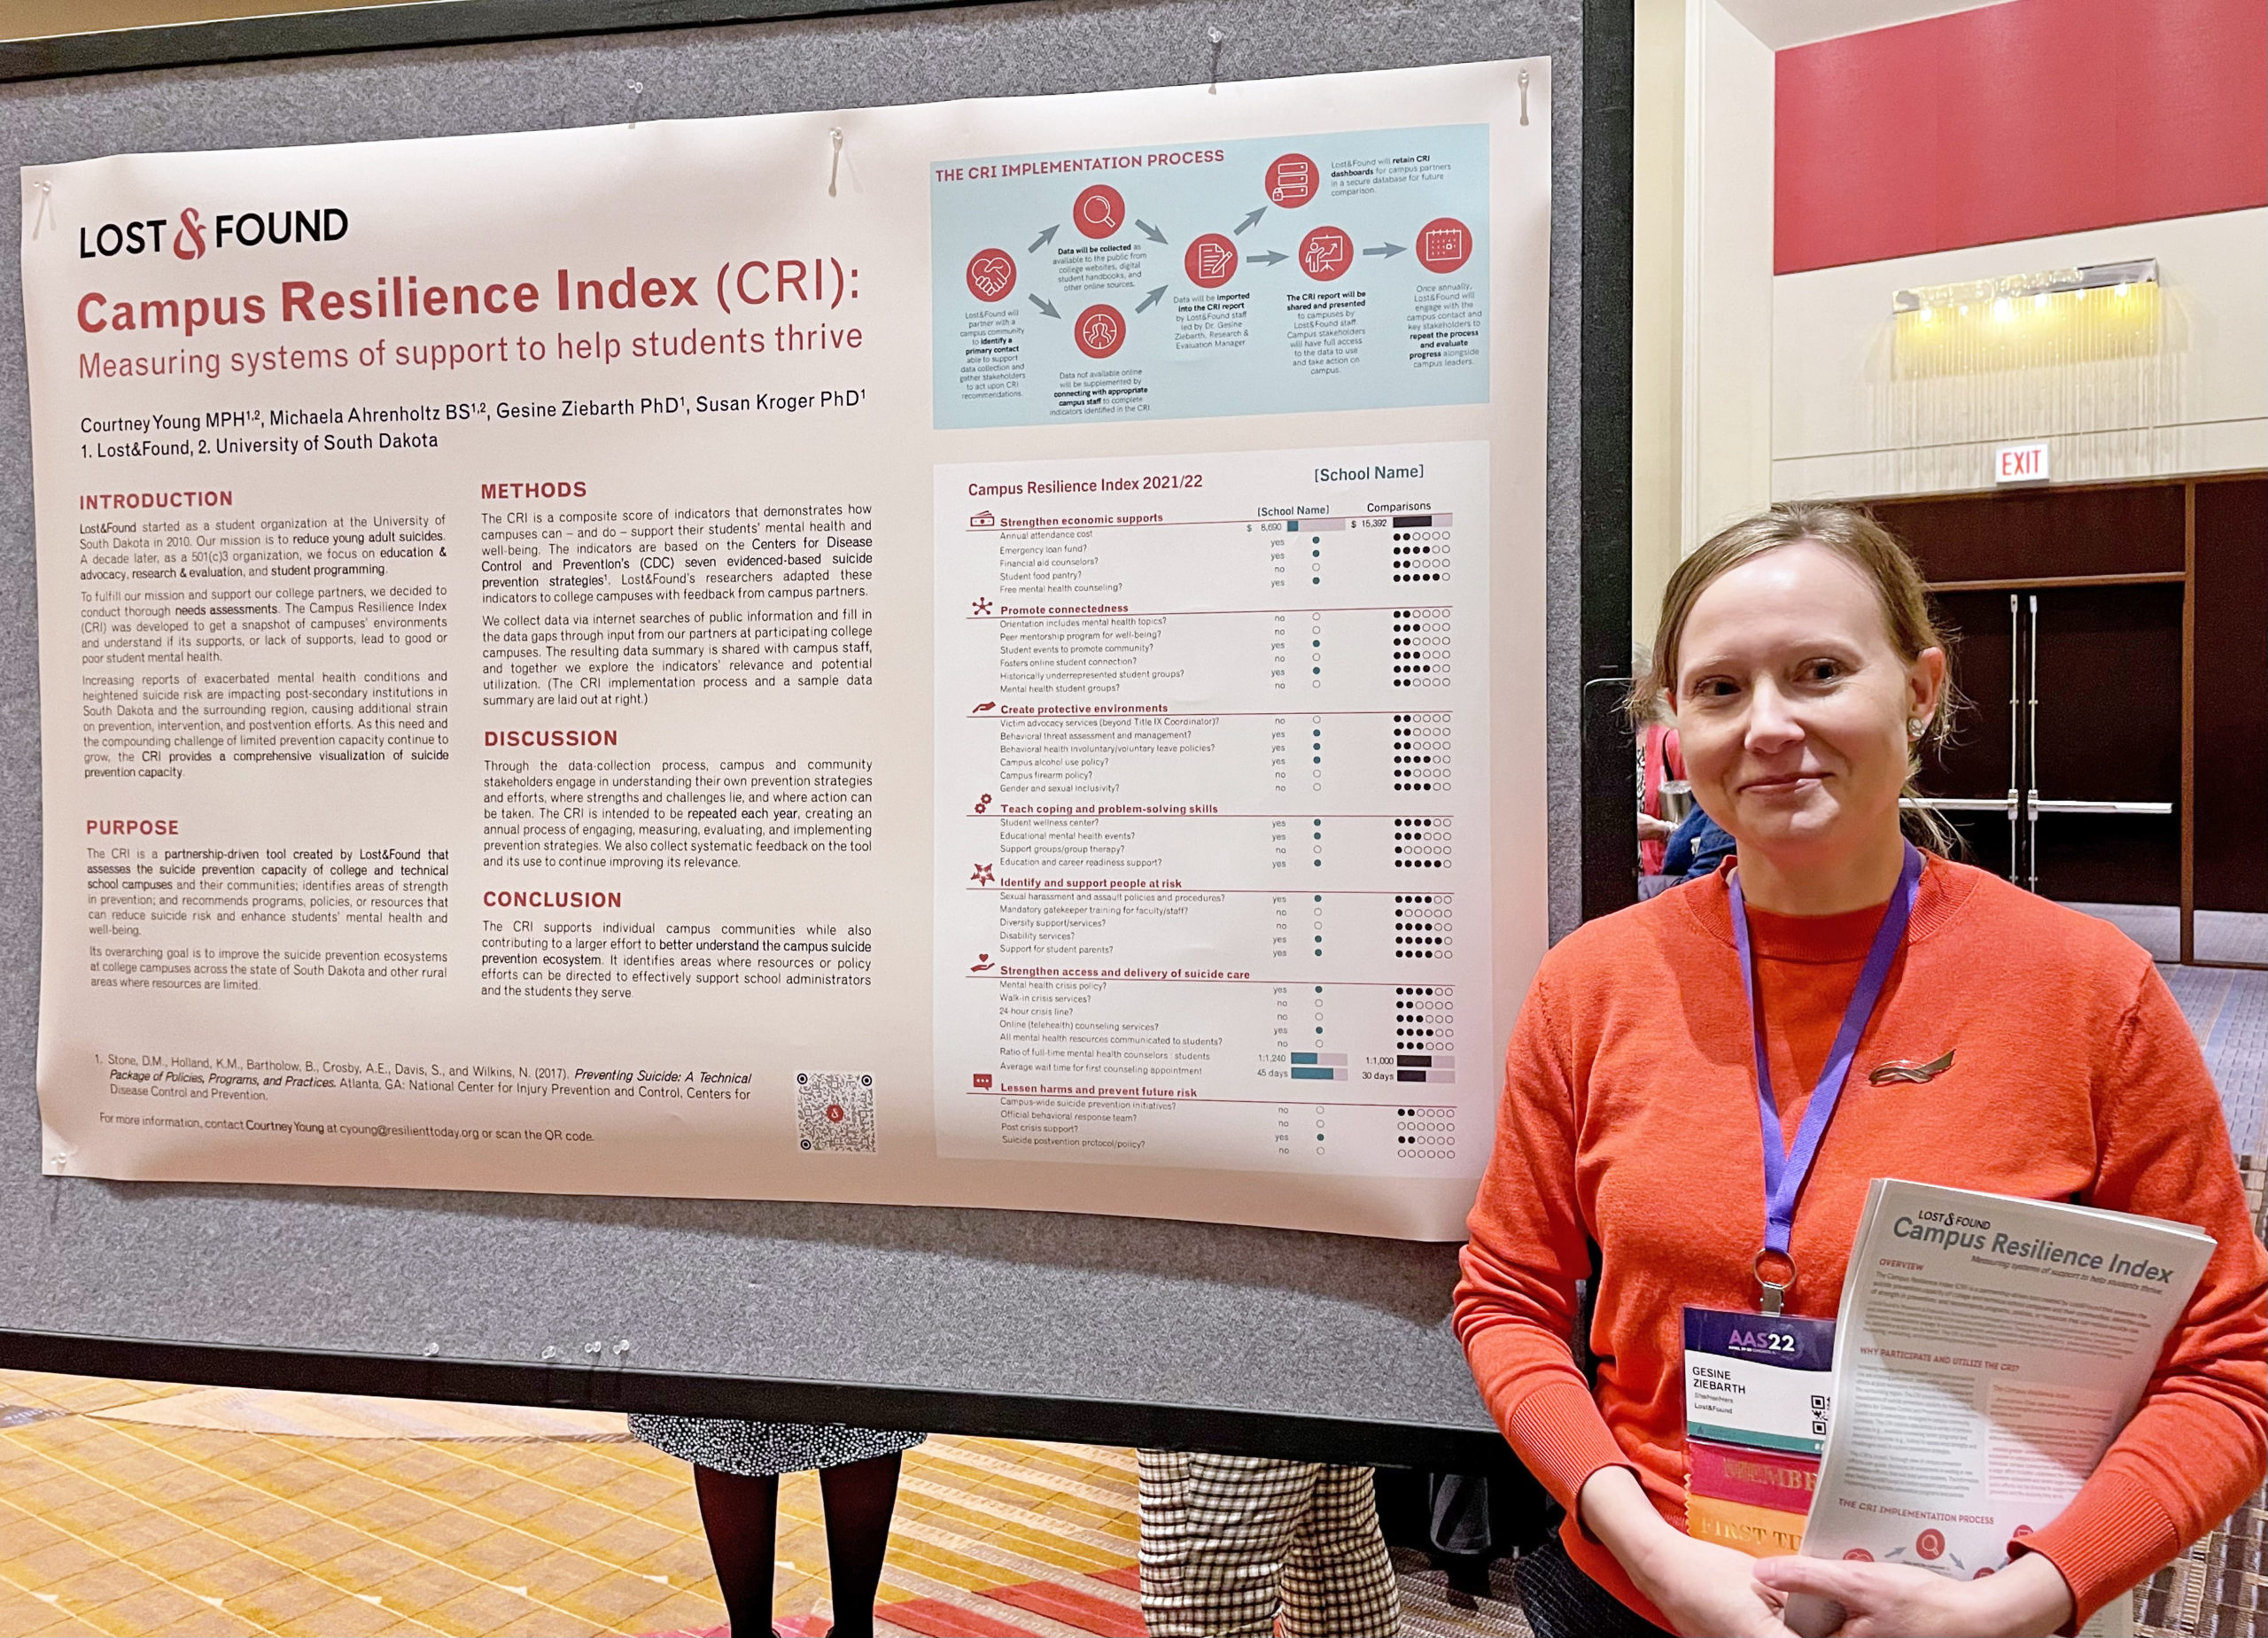 Research & Evaluation Manager Gesine Ziebarth presented a poster on the Campus Resilience Index at the annual conference of the American Association of Suicidology held April 27-30 in Chicago.